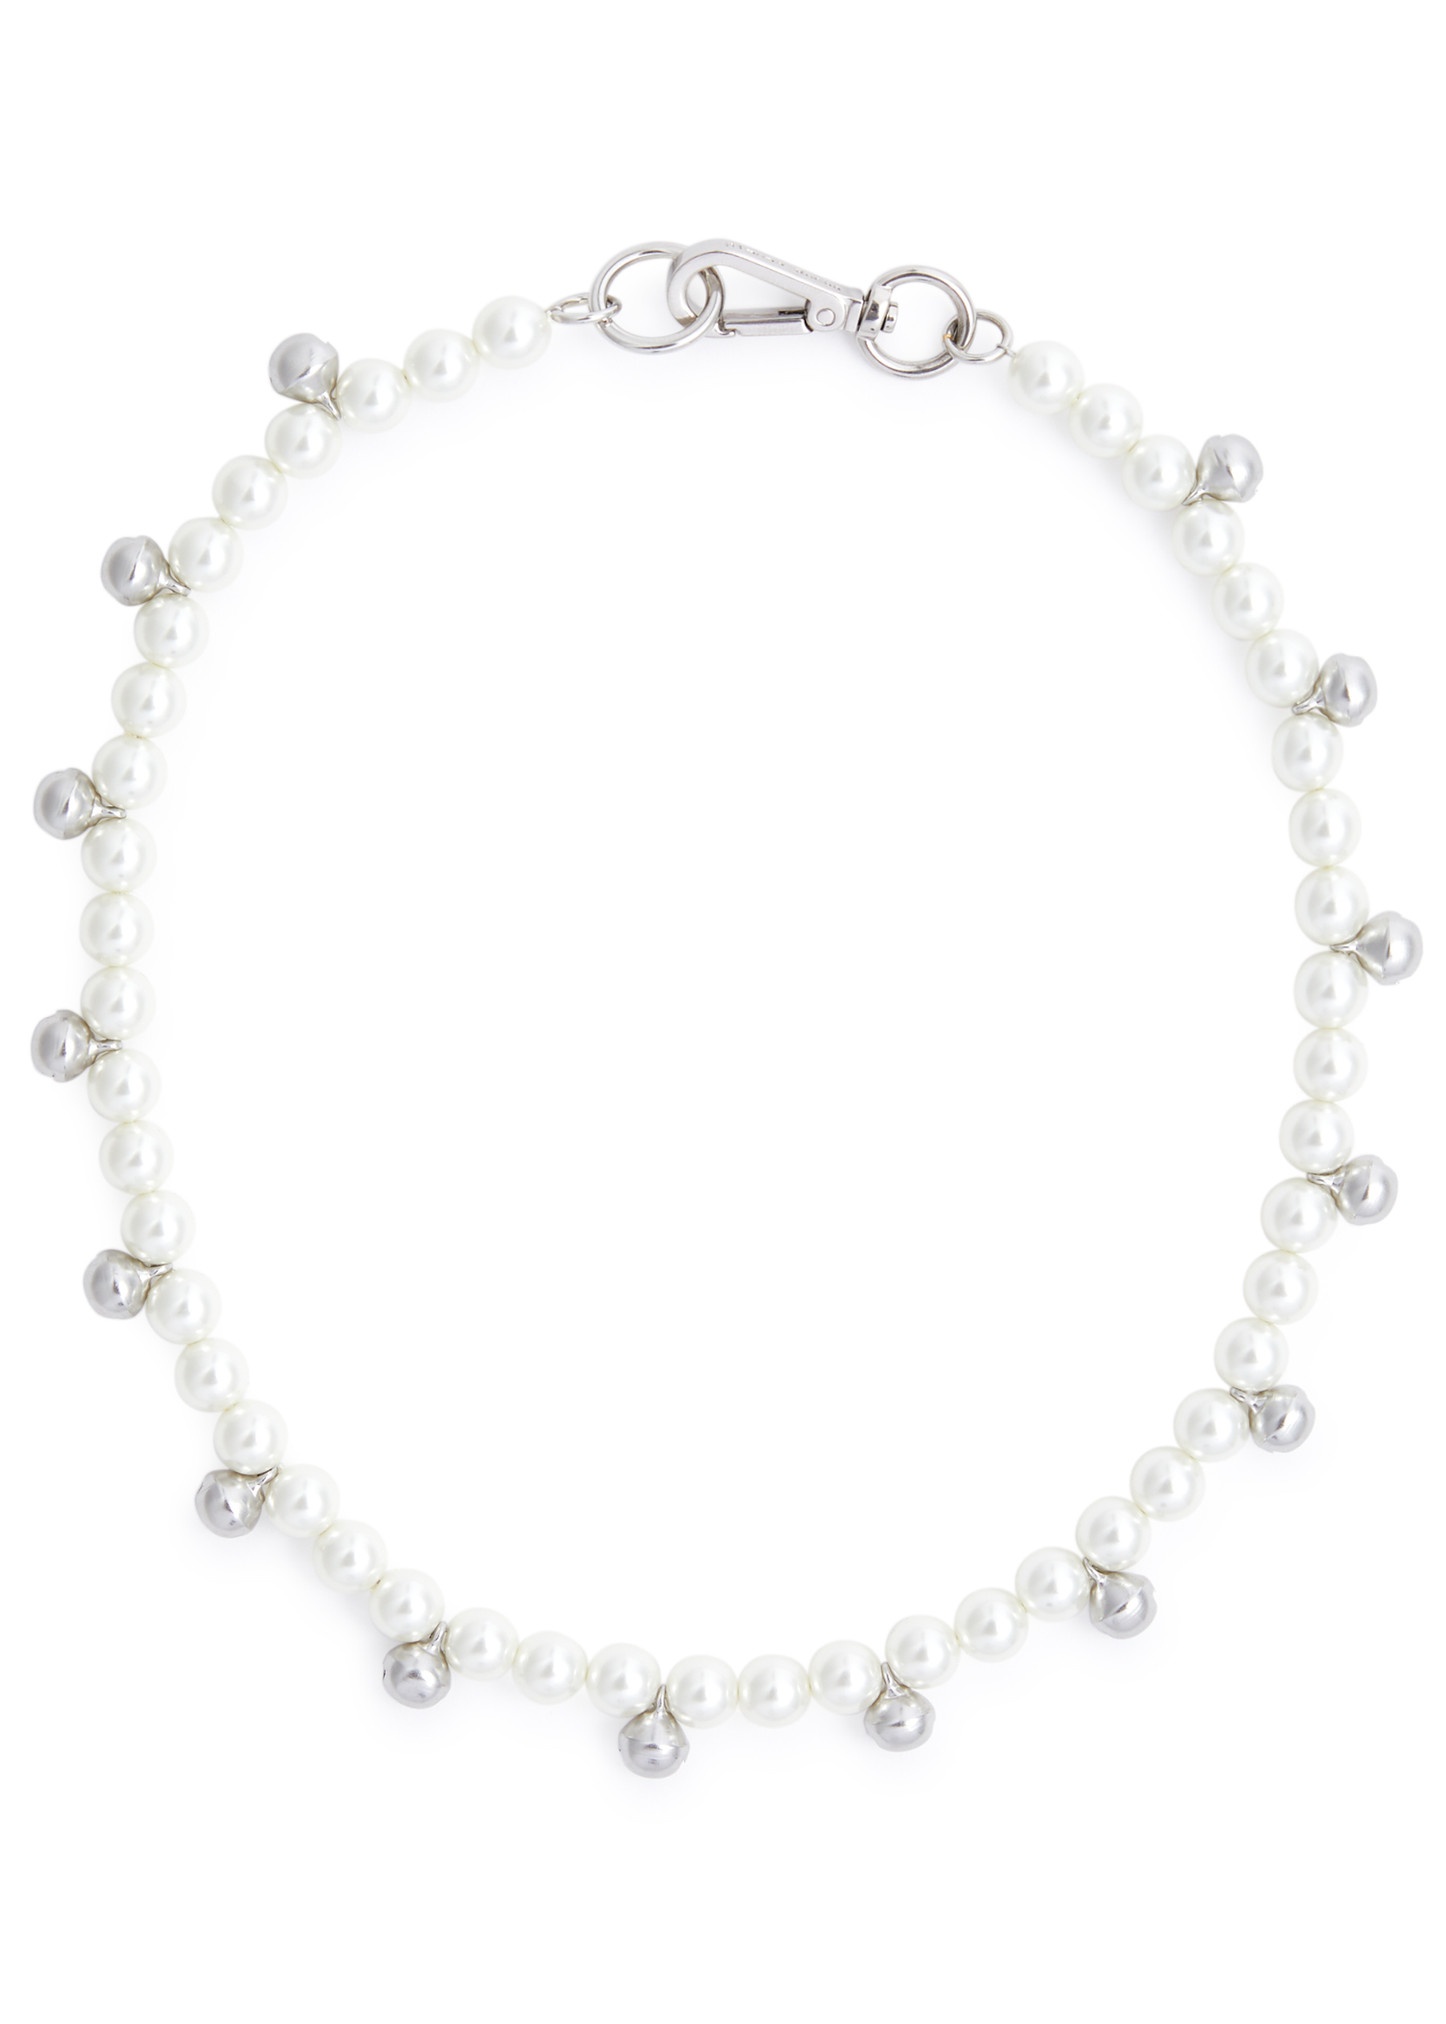 Bell charm faux pearl necklace - 1